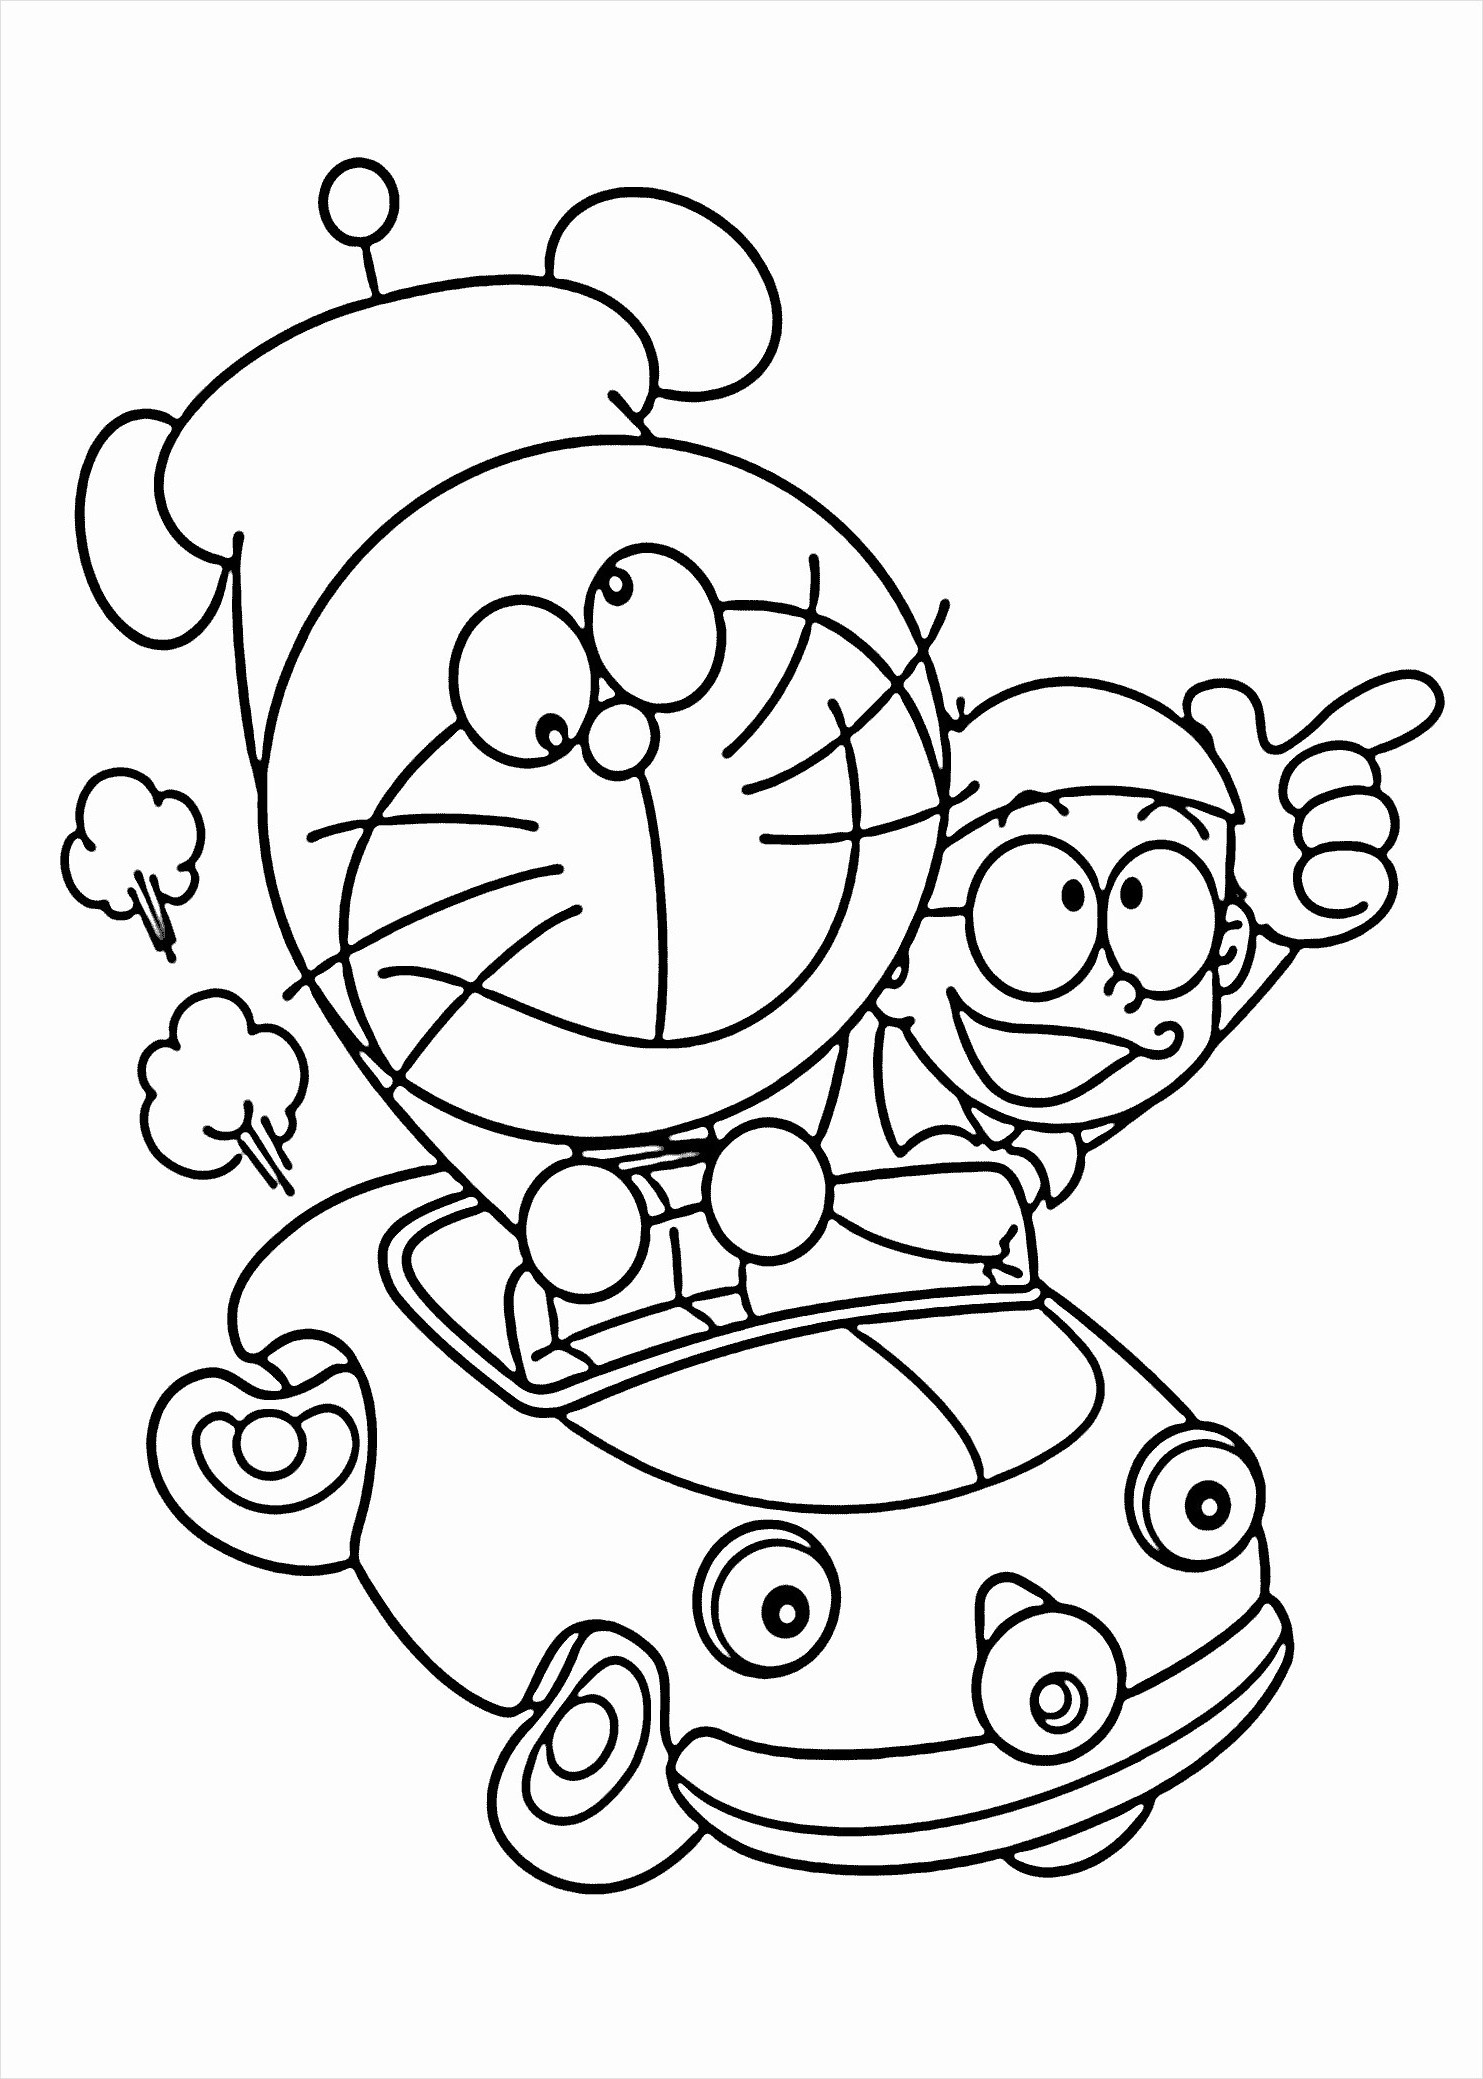 coloring page of animals for adults cool collection unique free coloring pages for adults animals of coloring page of animals for adults